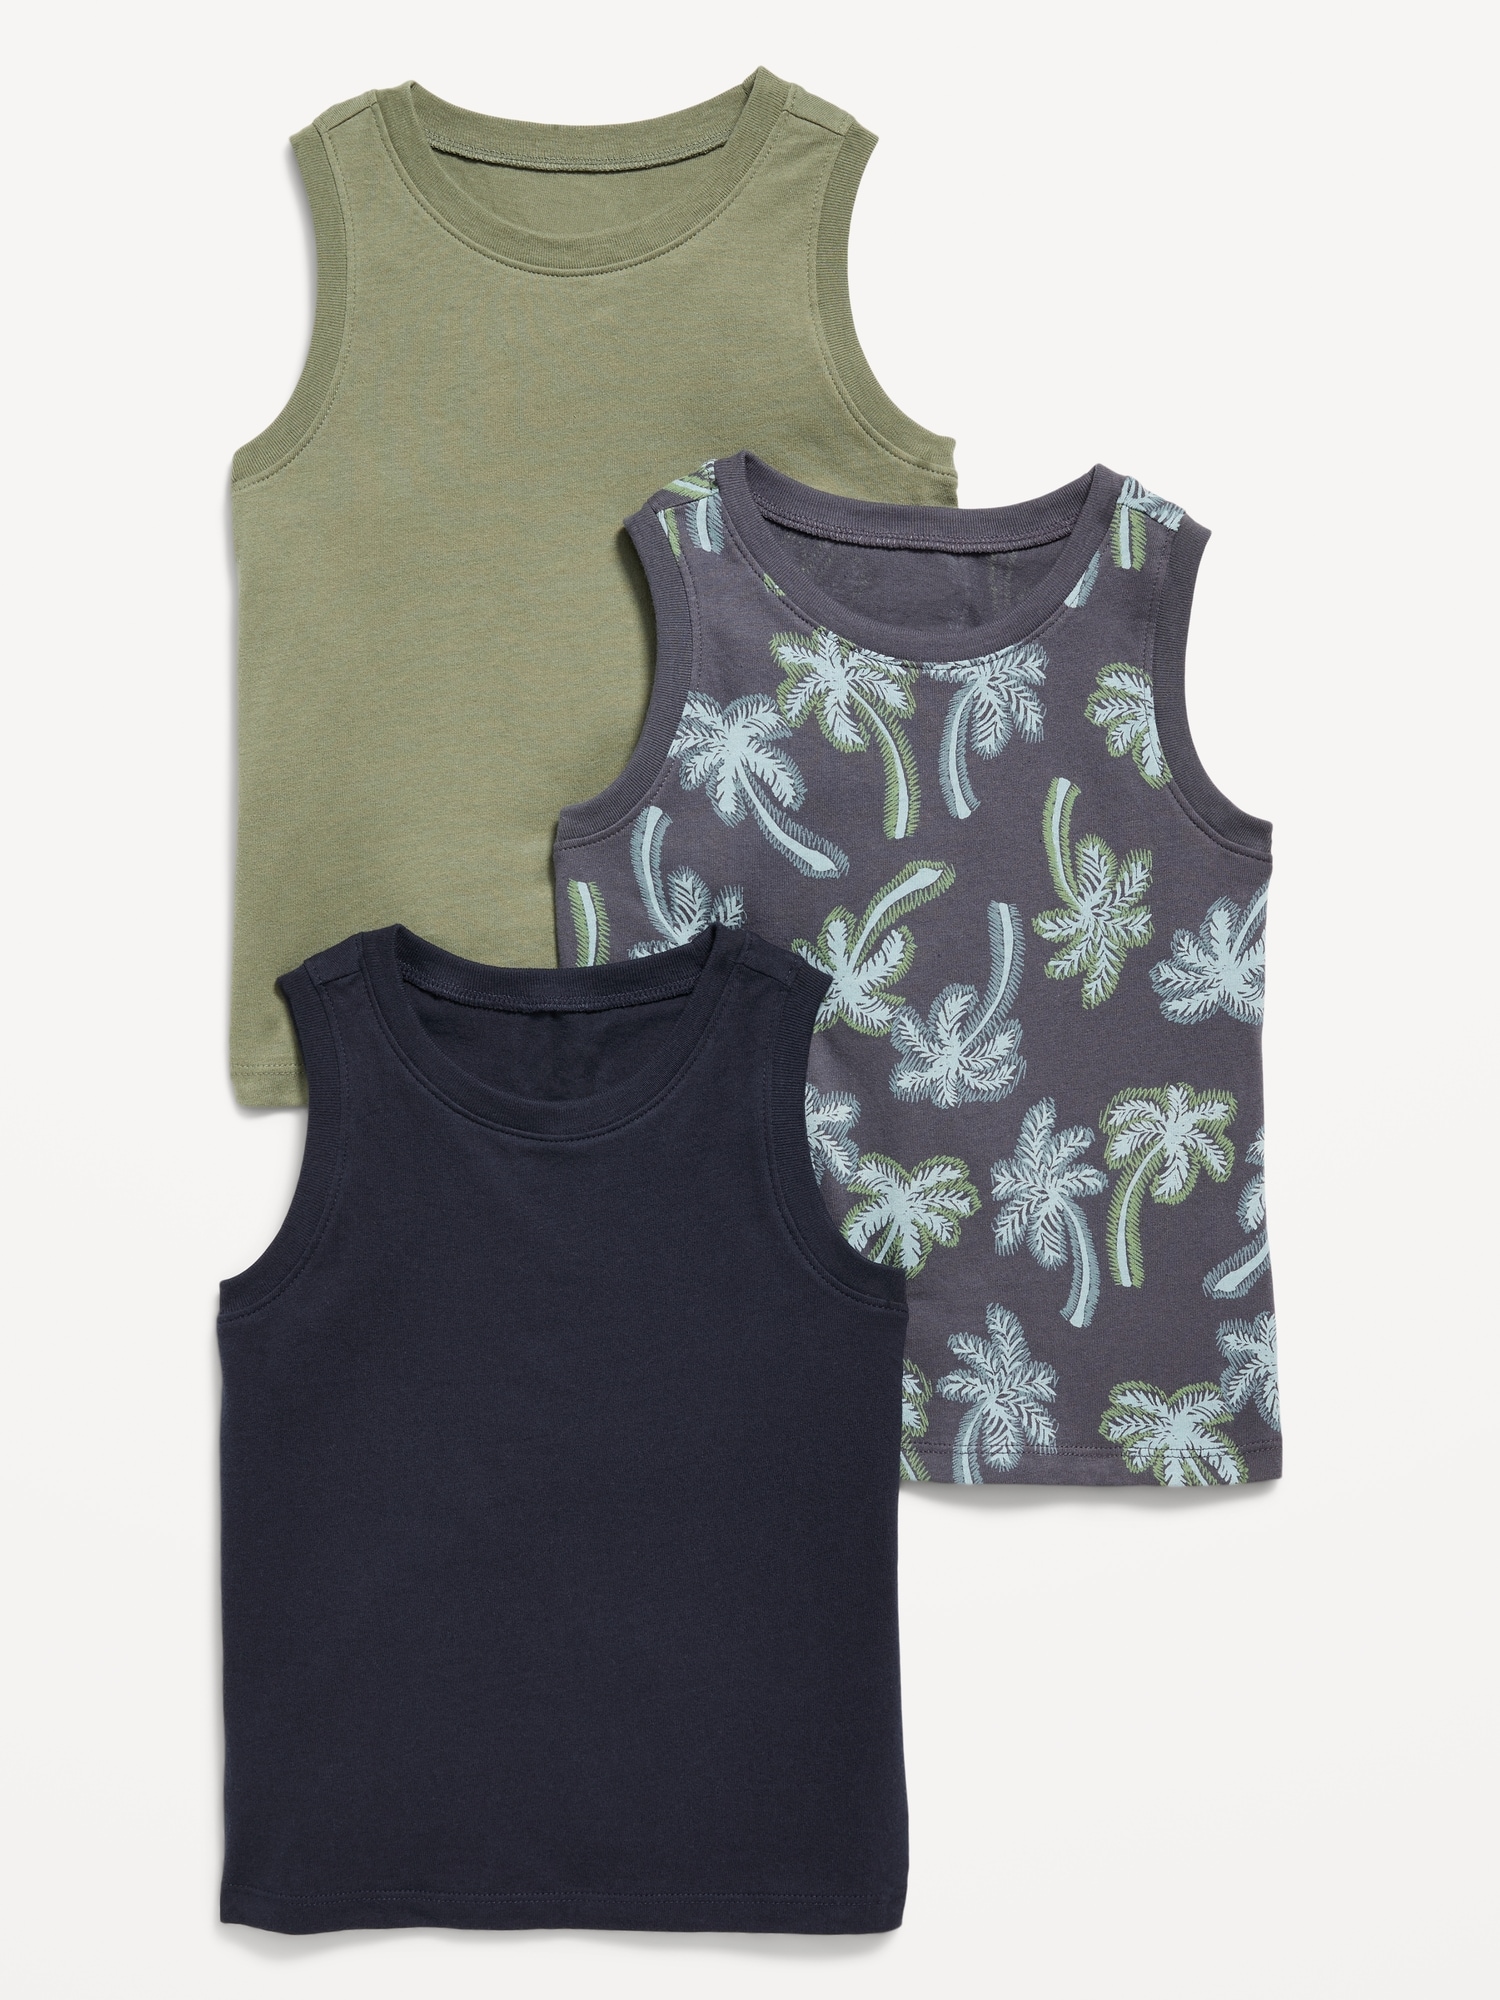 SKINY tank top 3 pack in trio selection